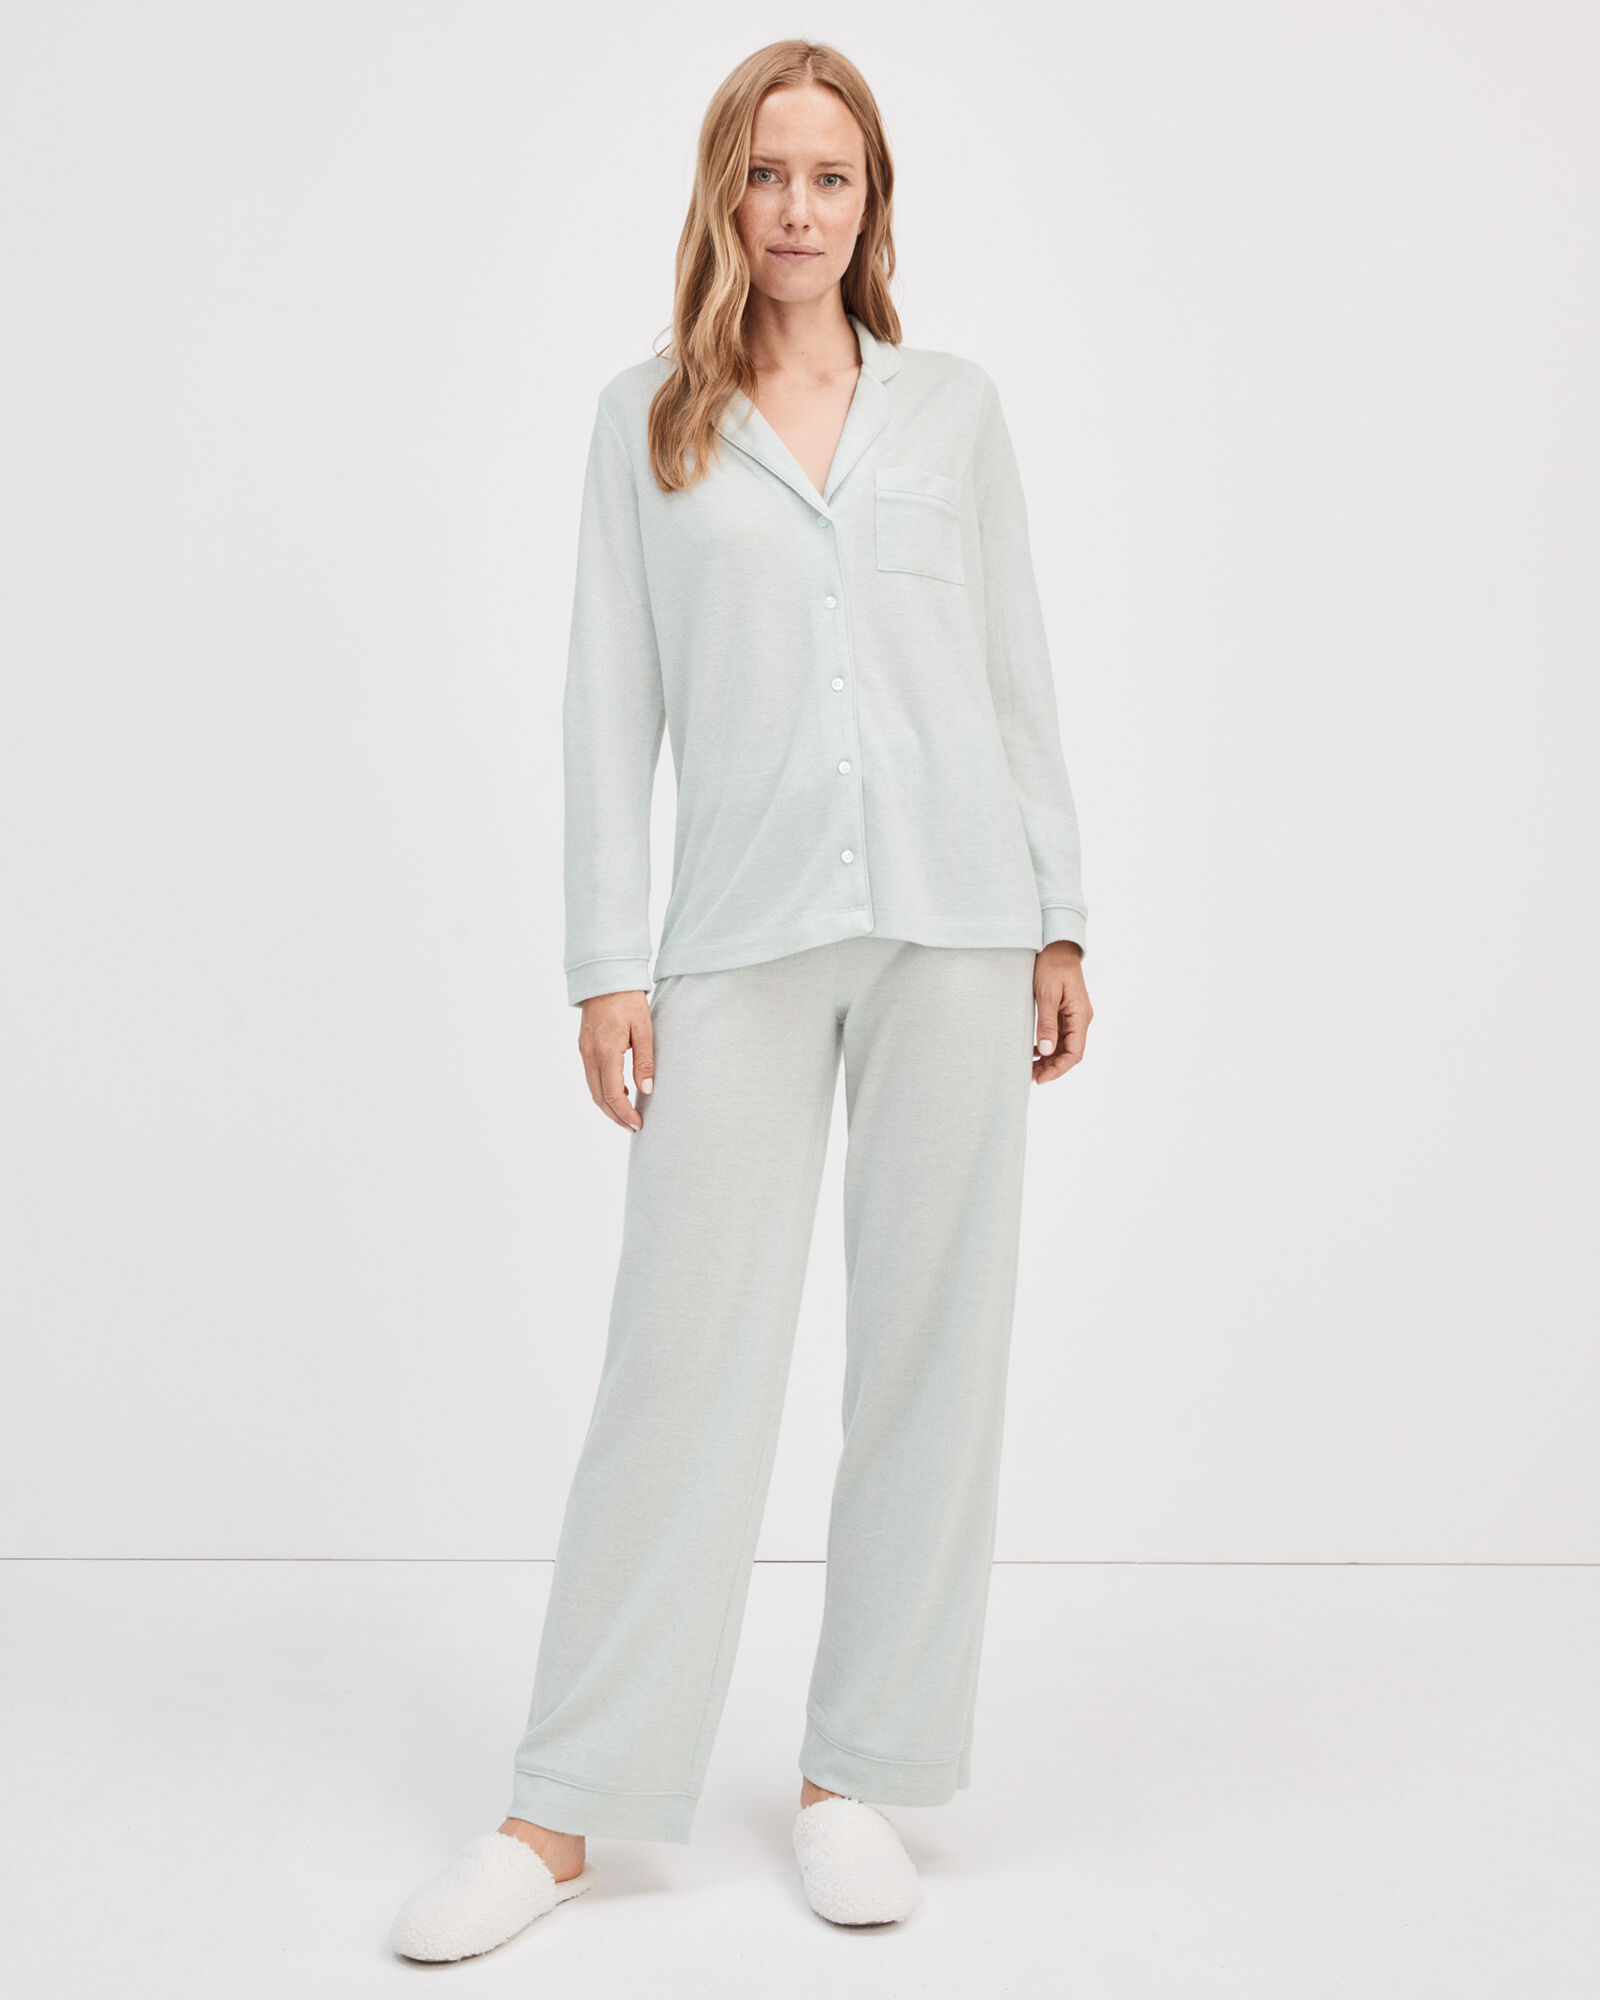 Marled Knit Pajama Shirt | Haven Well Within